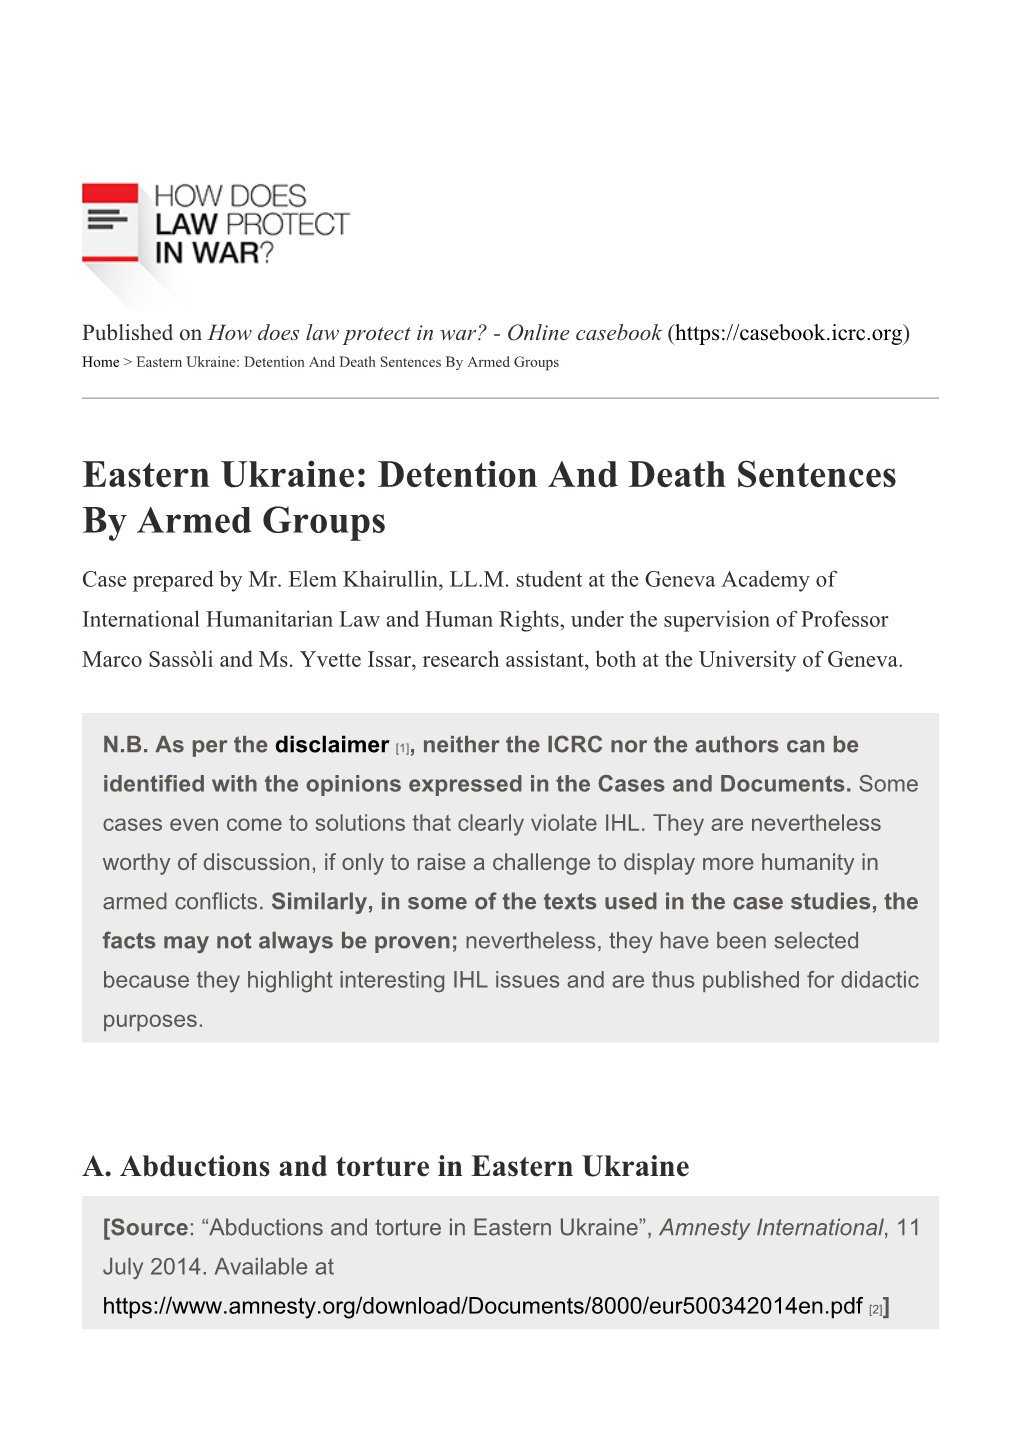 Eastern Ukraine: Detention and Death Sentences by Armed Groups